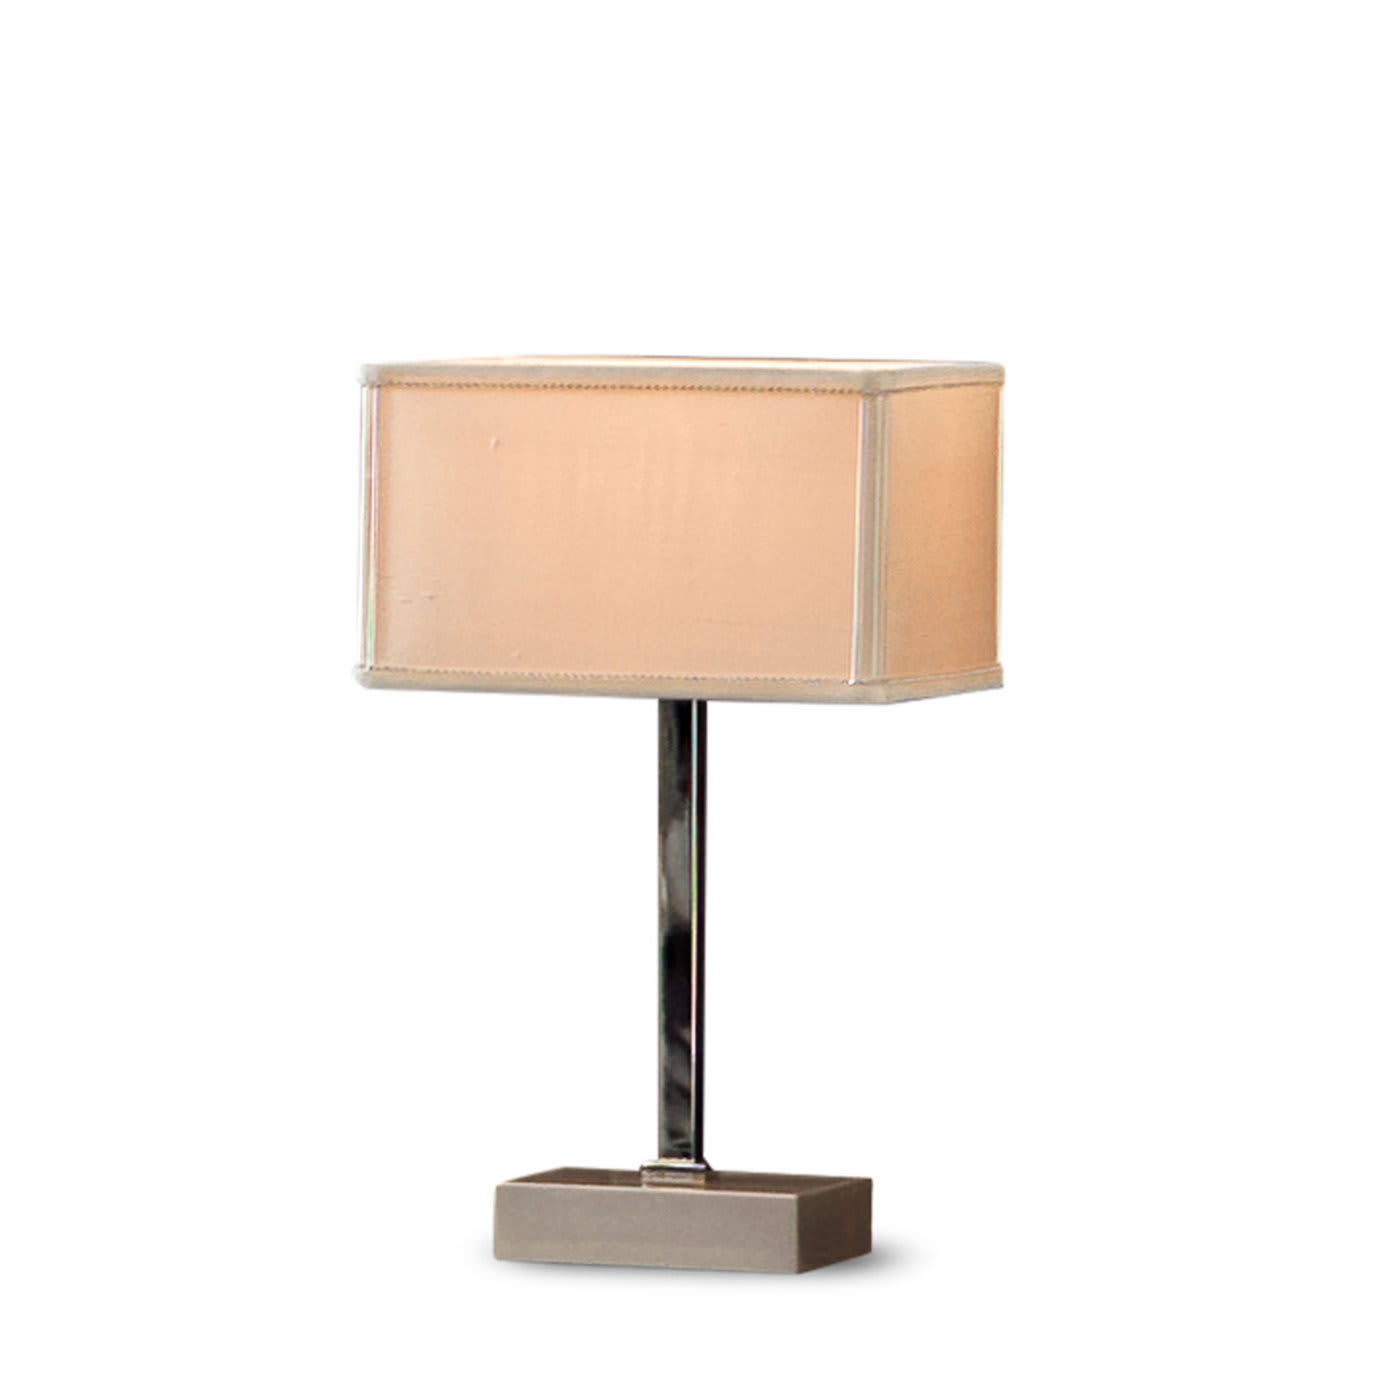 Keope Squared Table Lamp with Wooden Base - Corte Zari